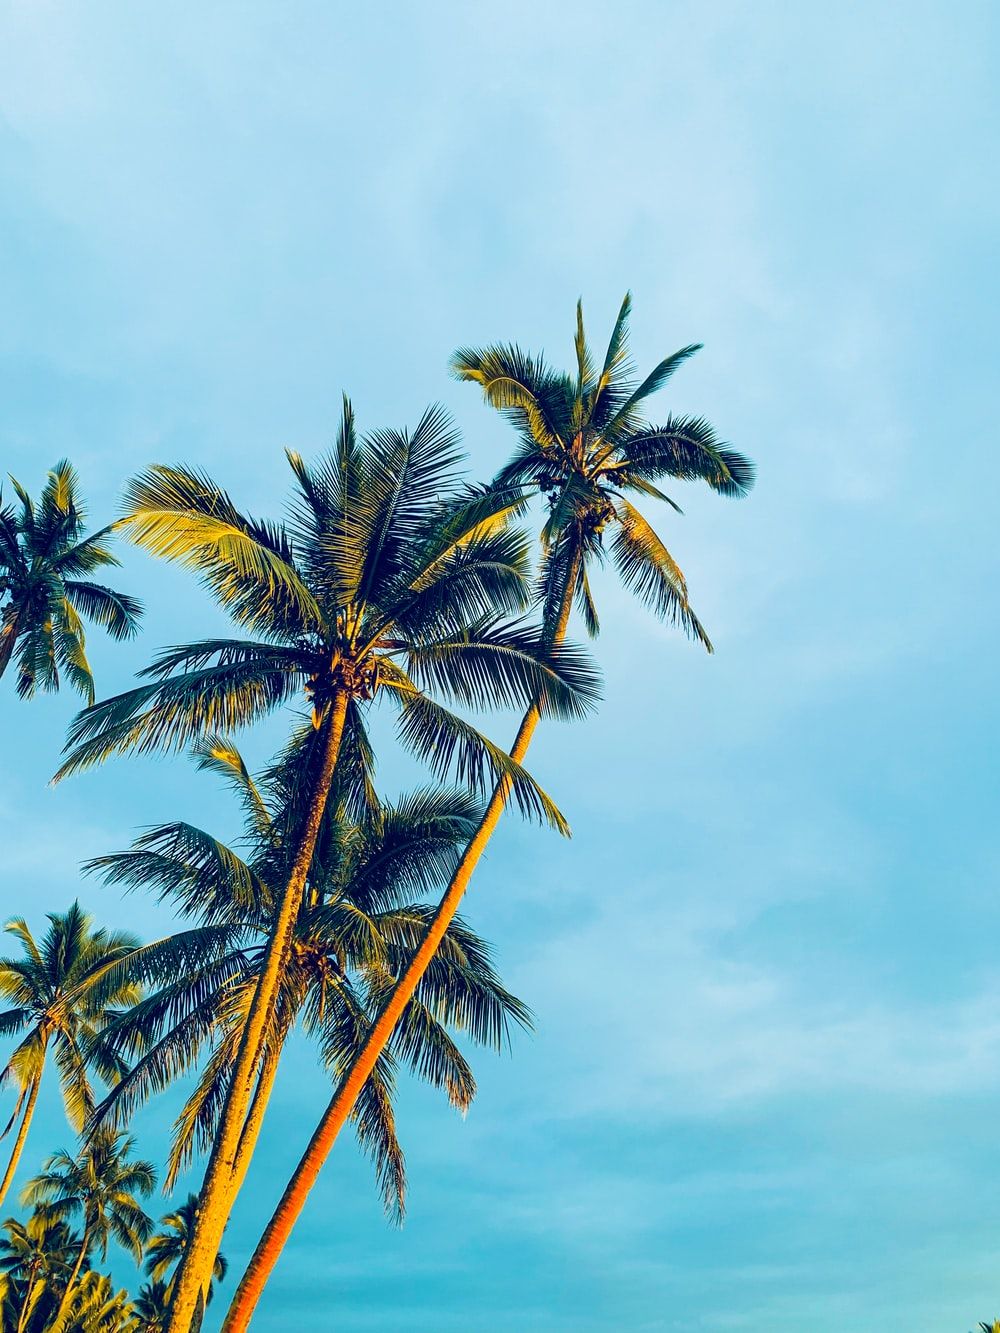 coconut trees under blue sky during daytime photo